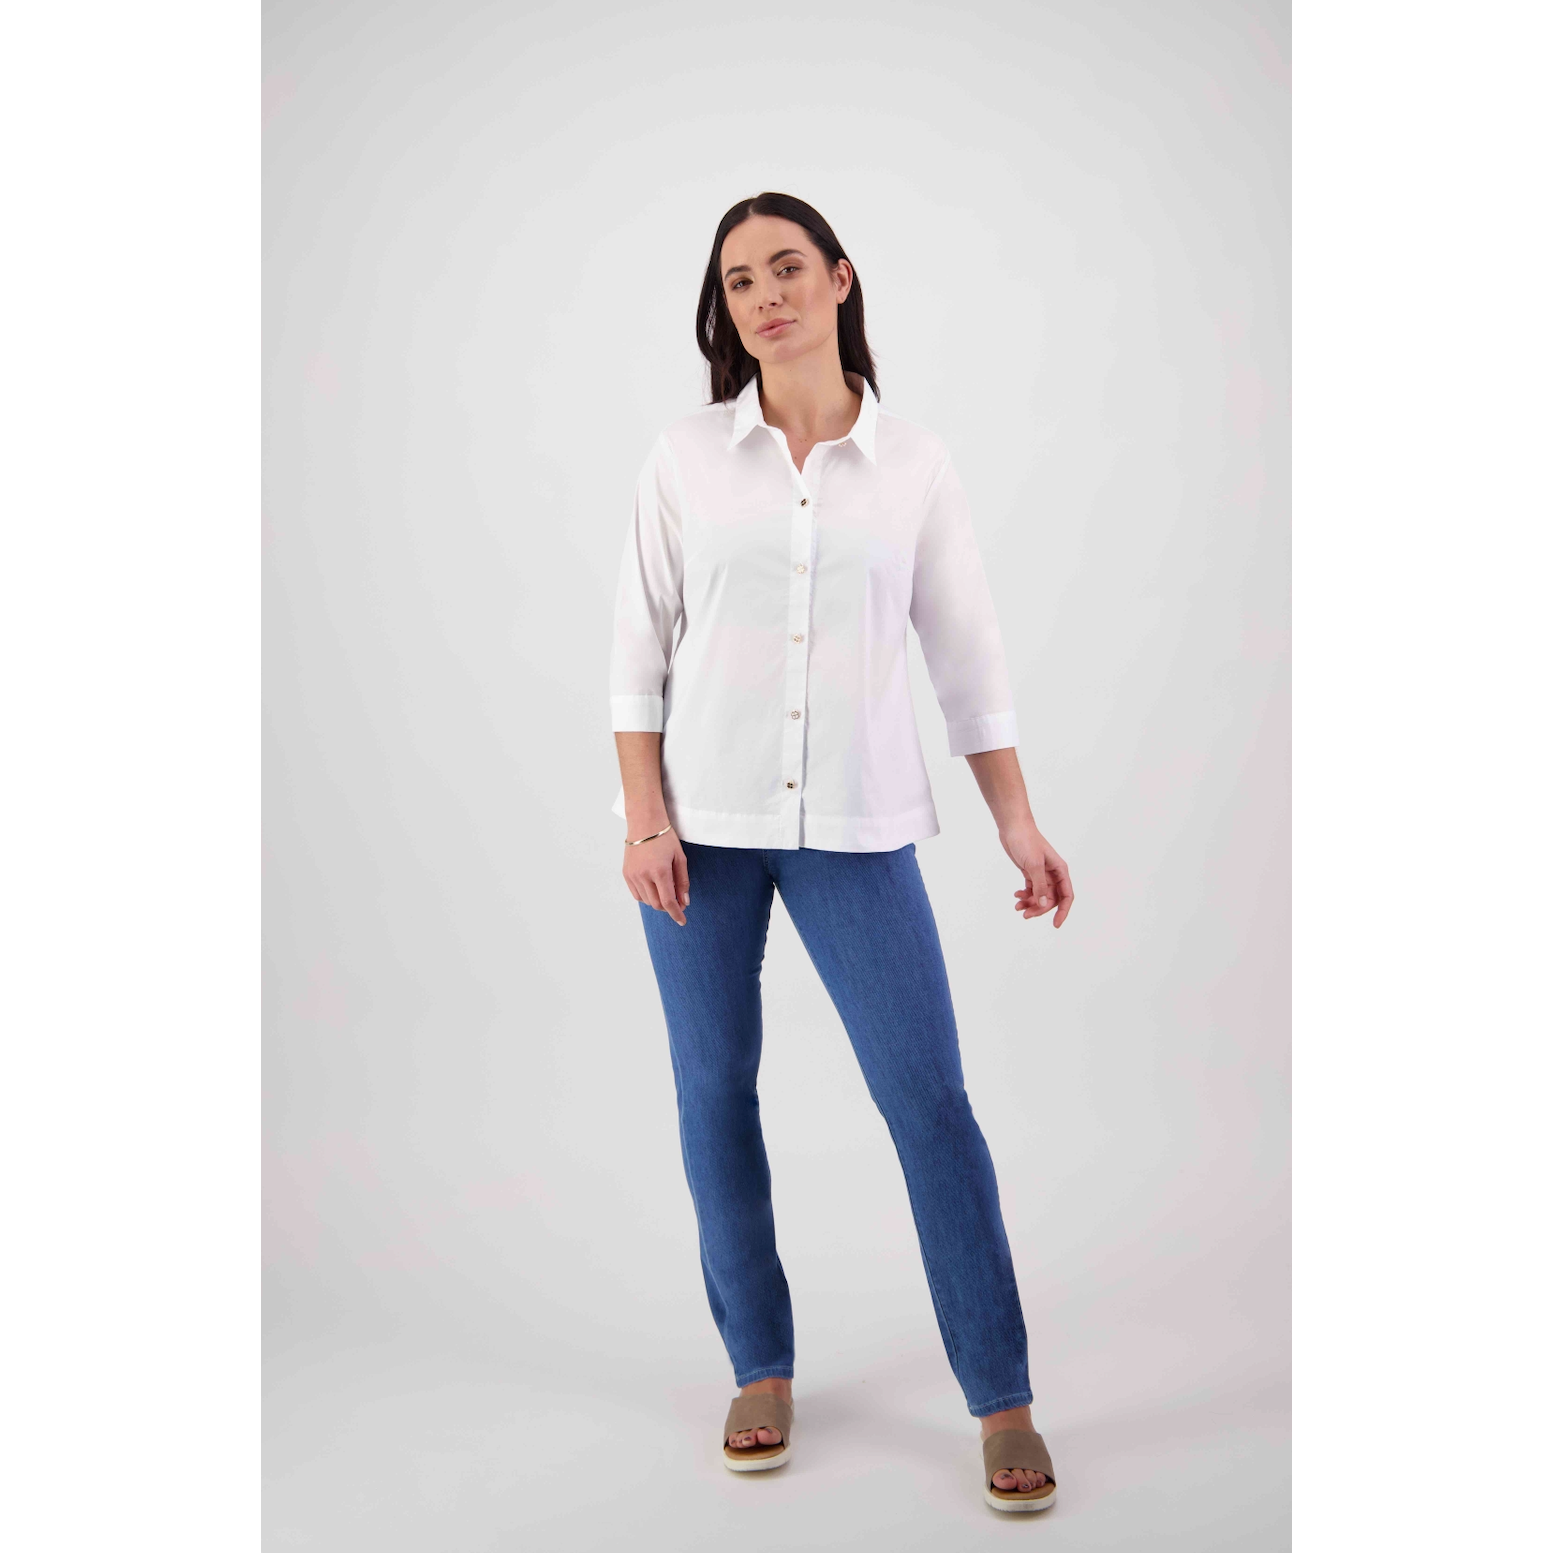 Elbow Length Sleeve Shirt with Fancy Buttons